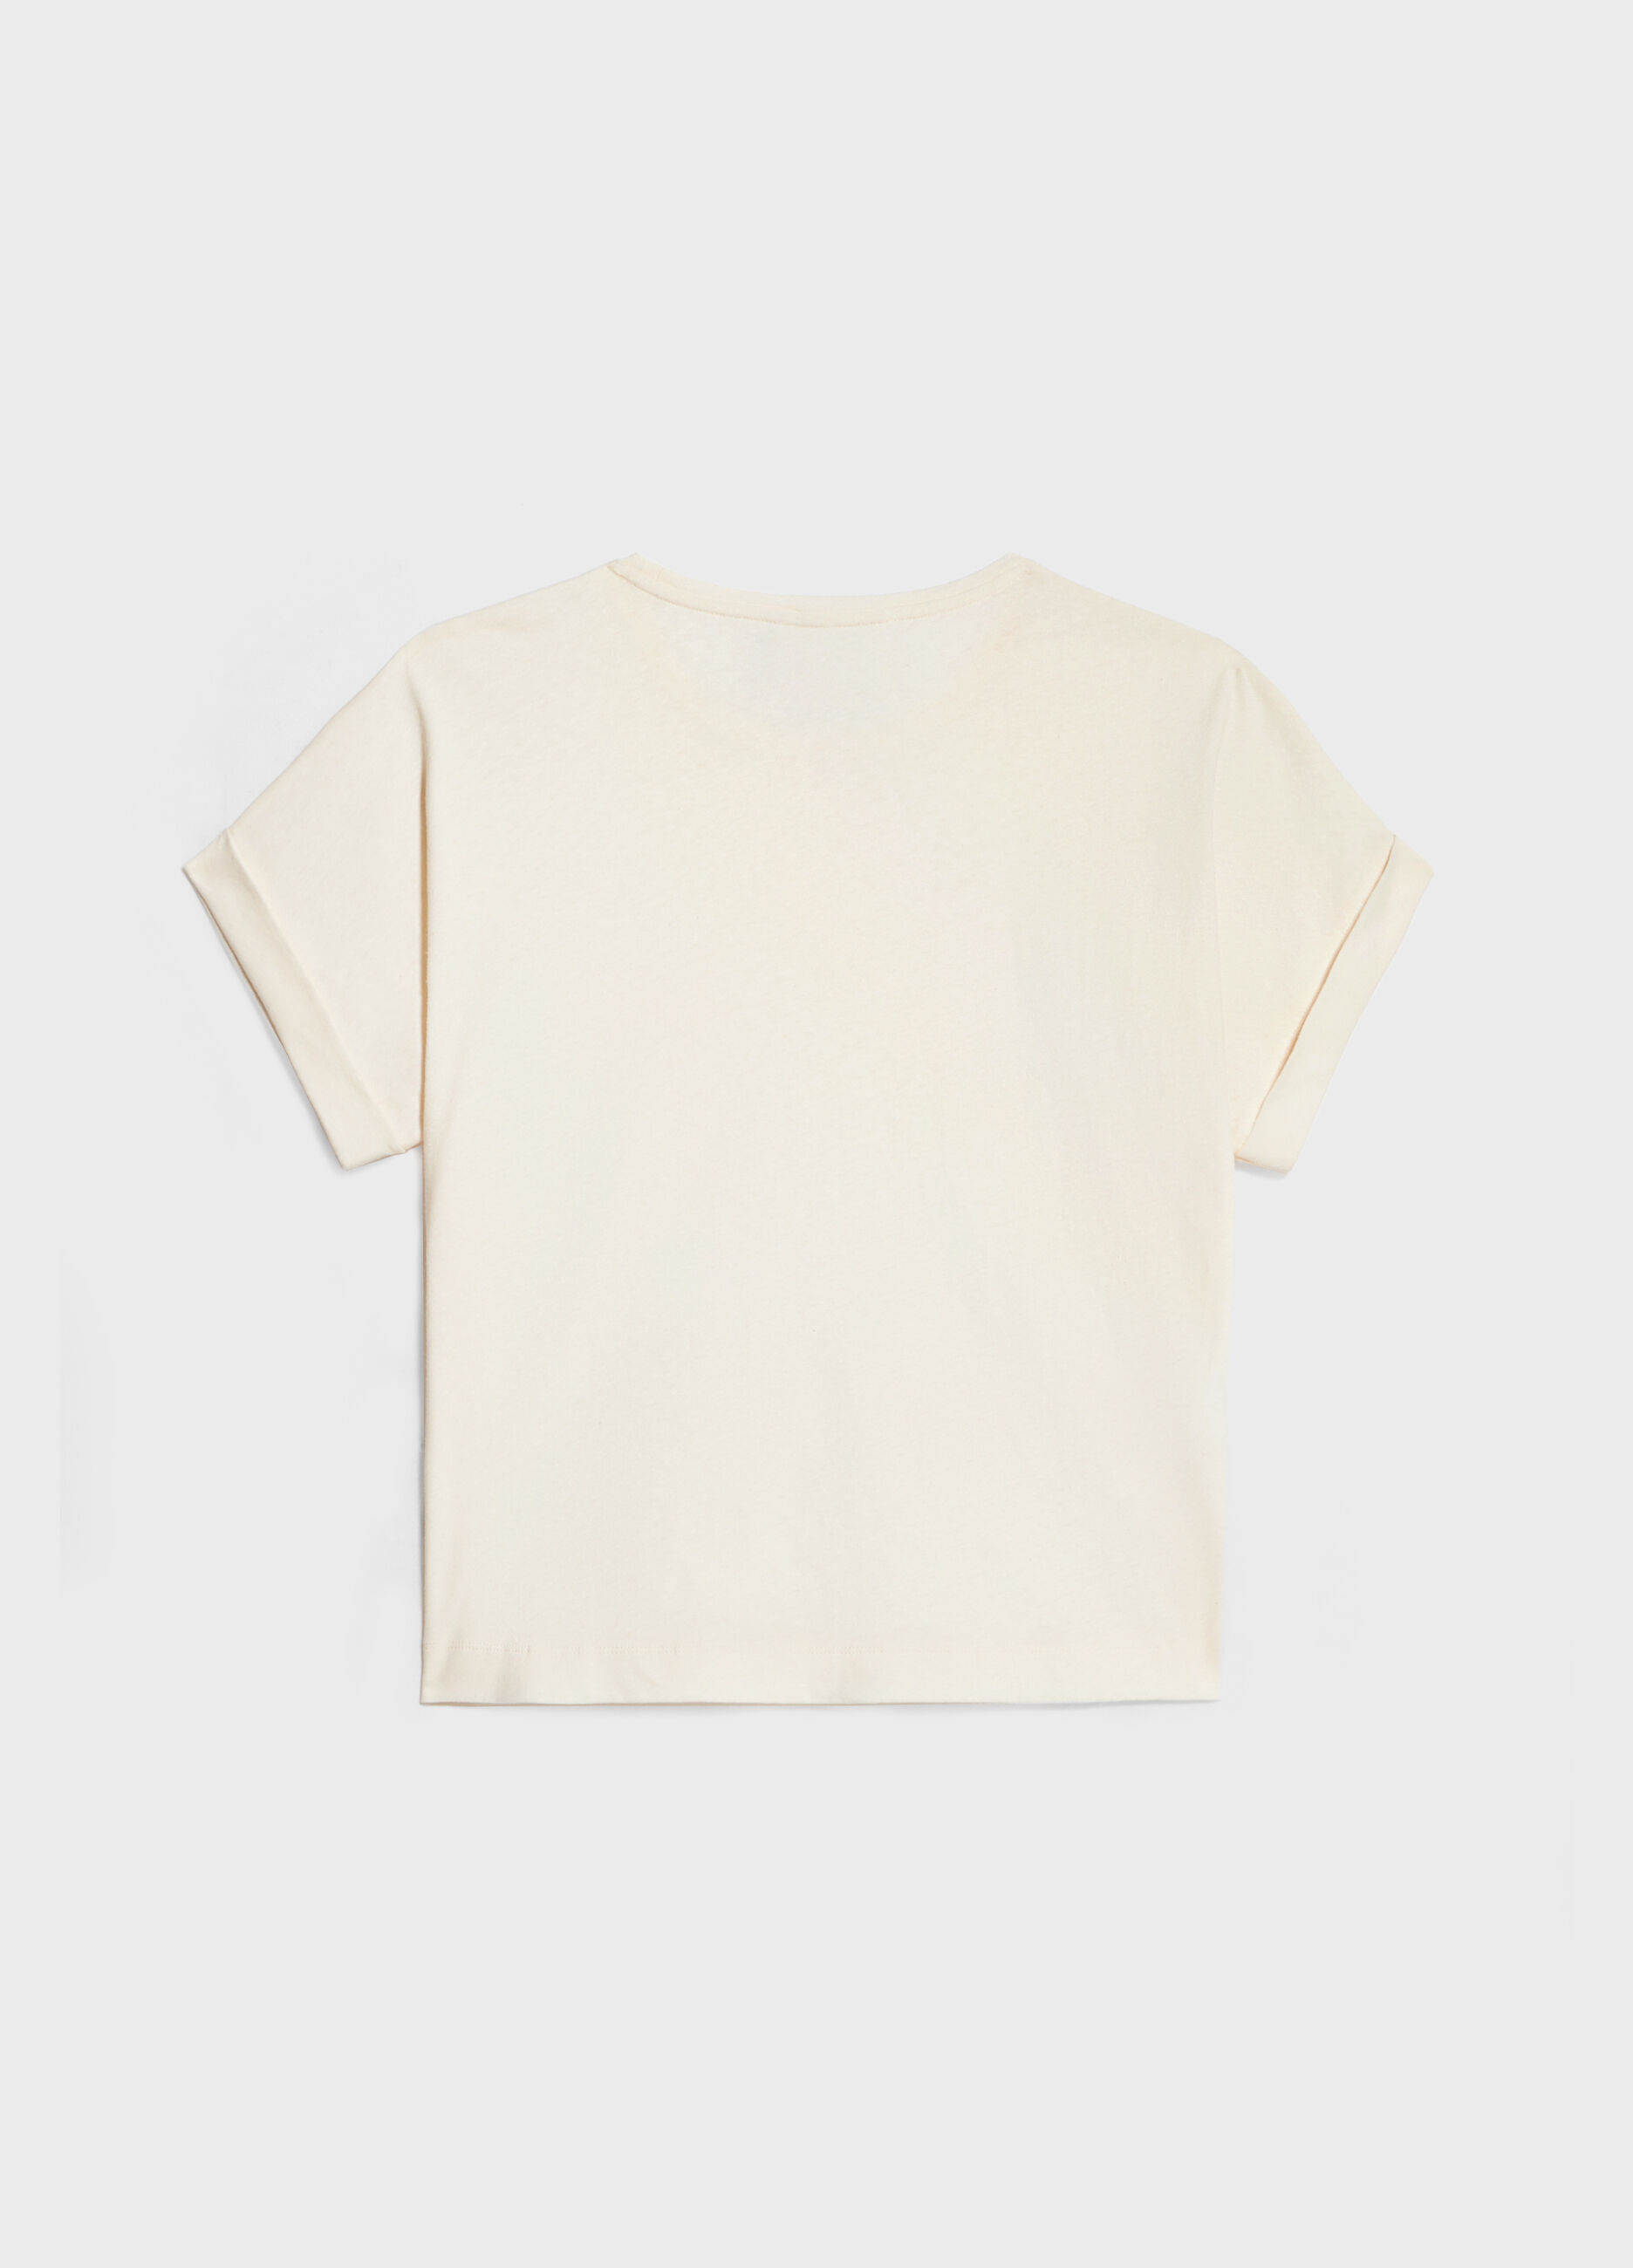 T-shirt in linen and cotton_5